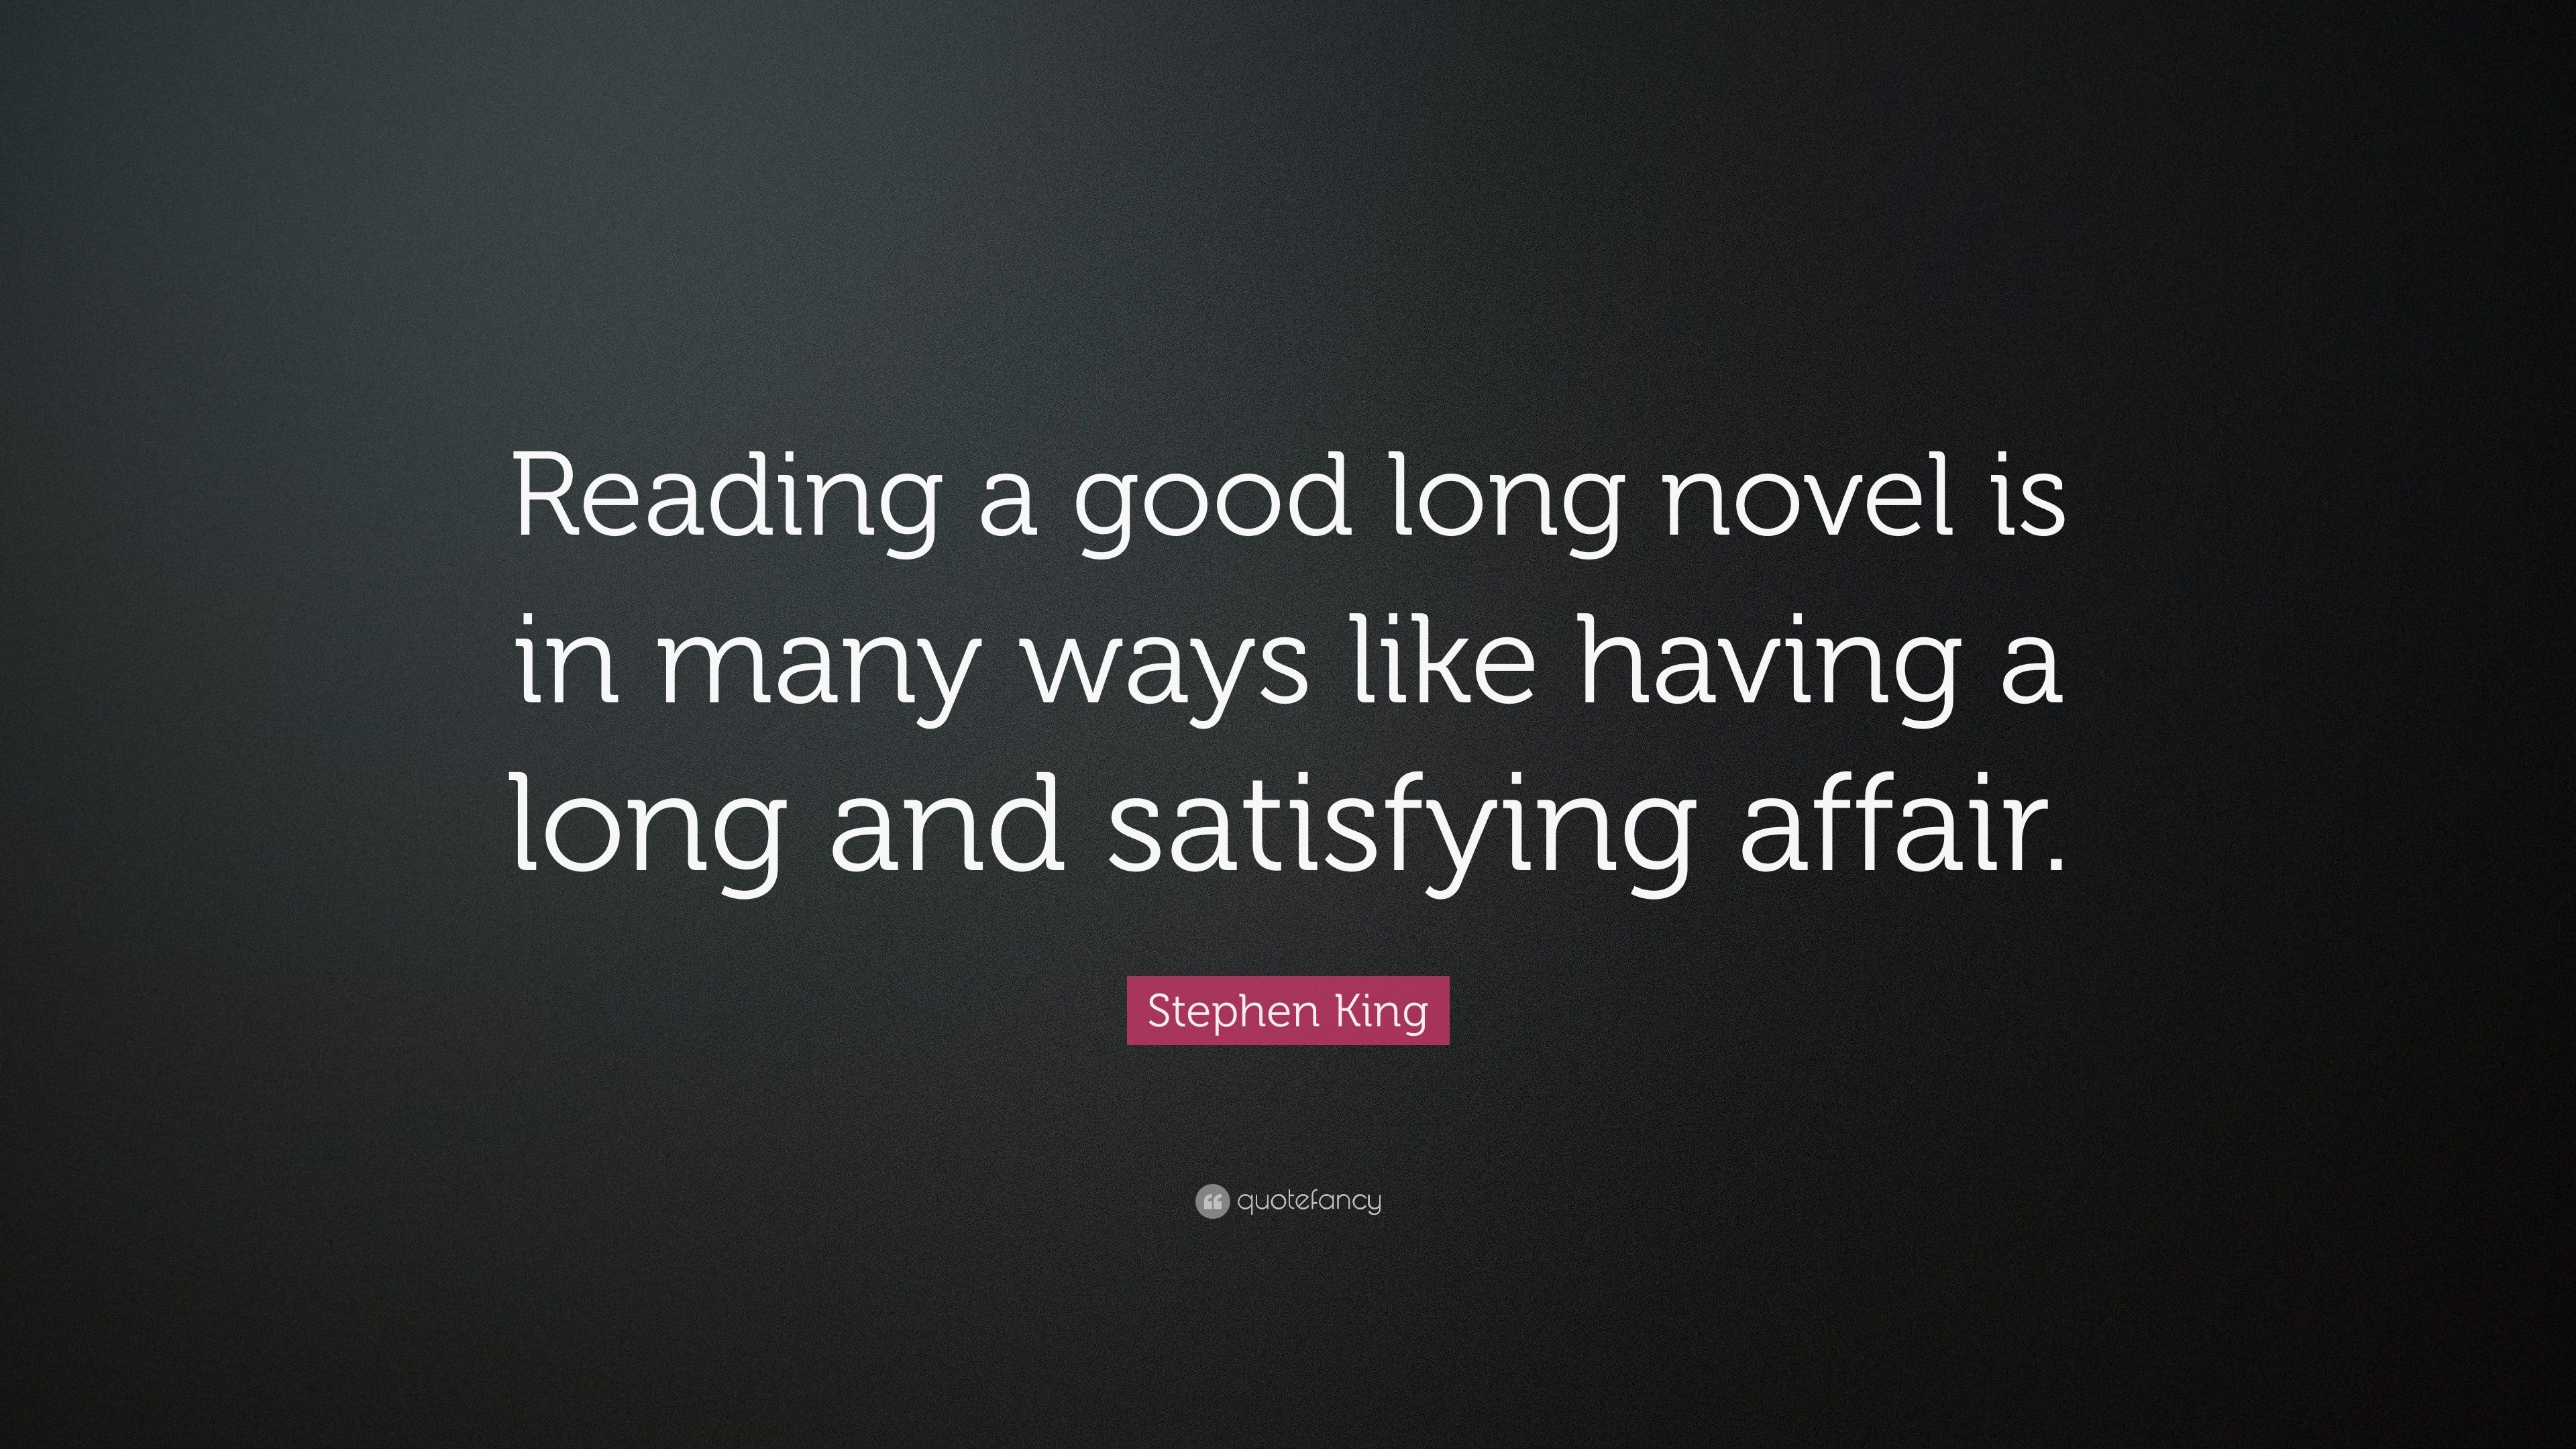 Stephen King Quote: “Reading a good long novel is in many ways like